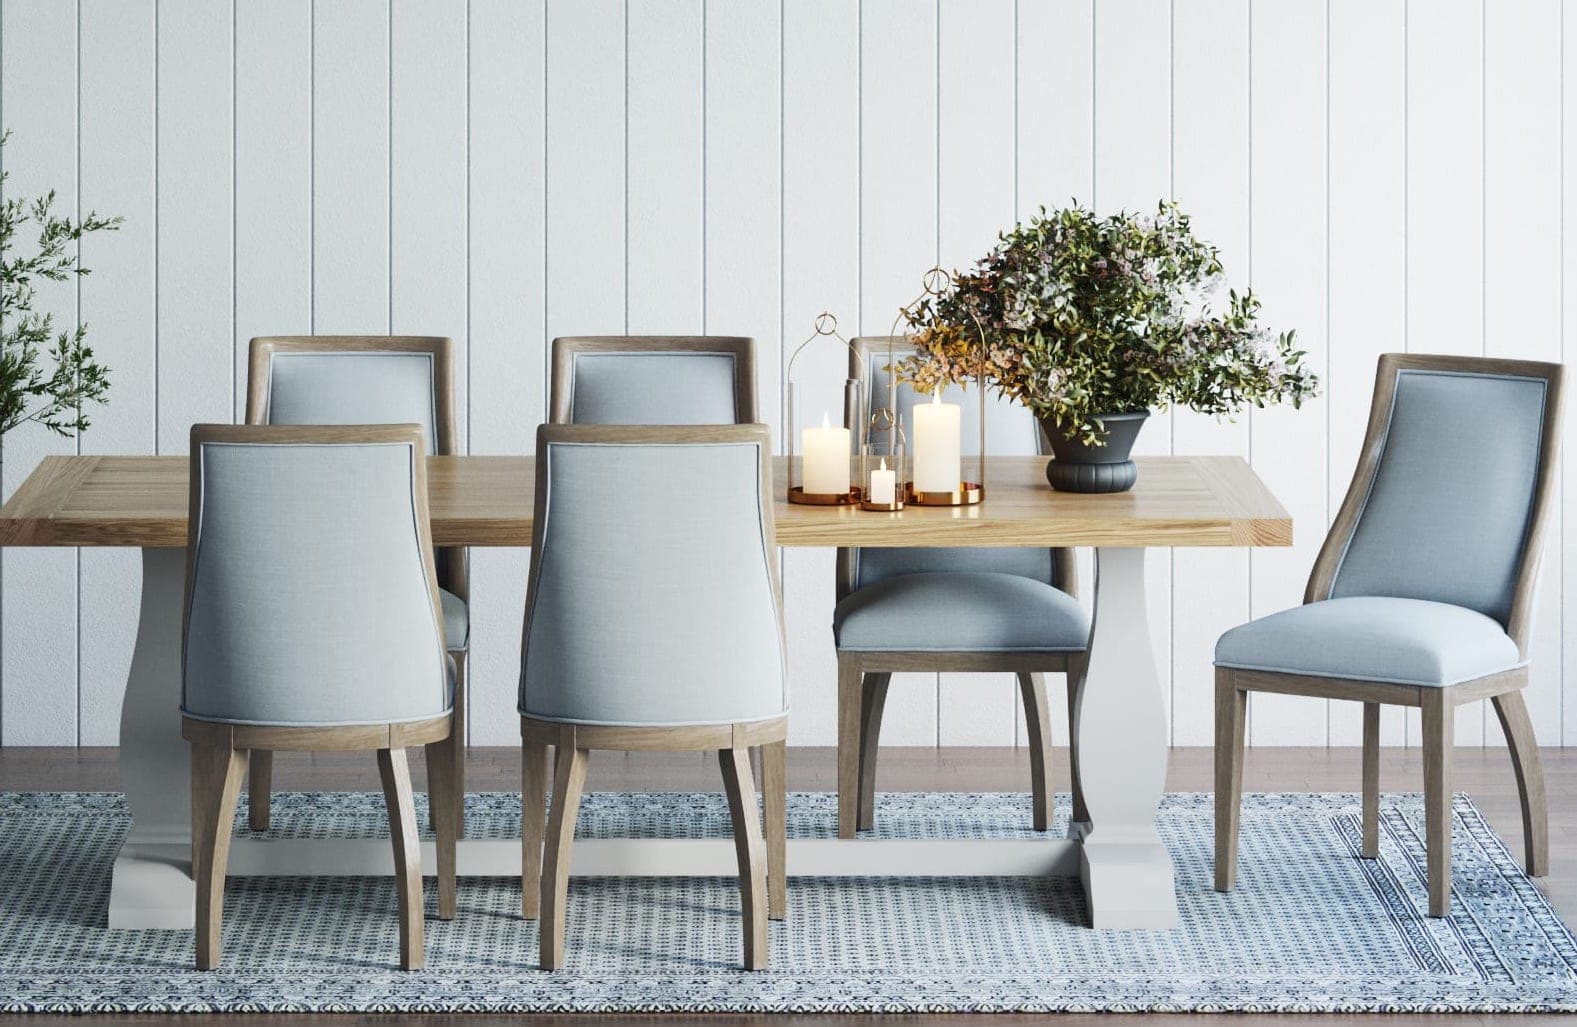 How to Match a Dining Table with the Right Chairs?